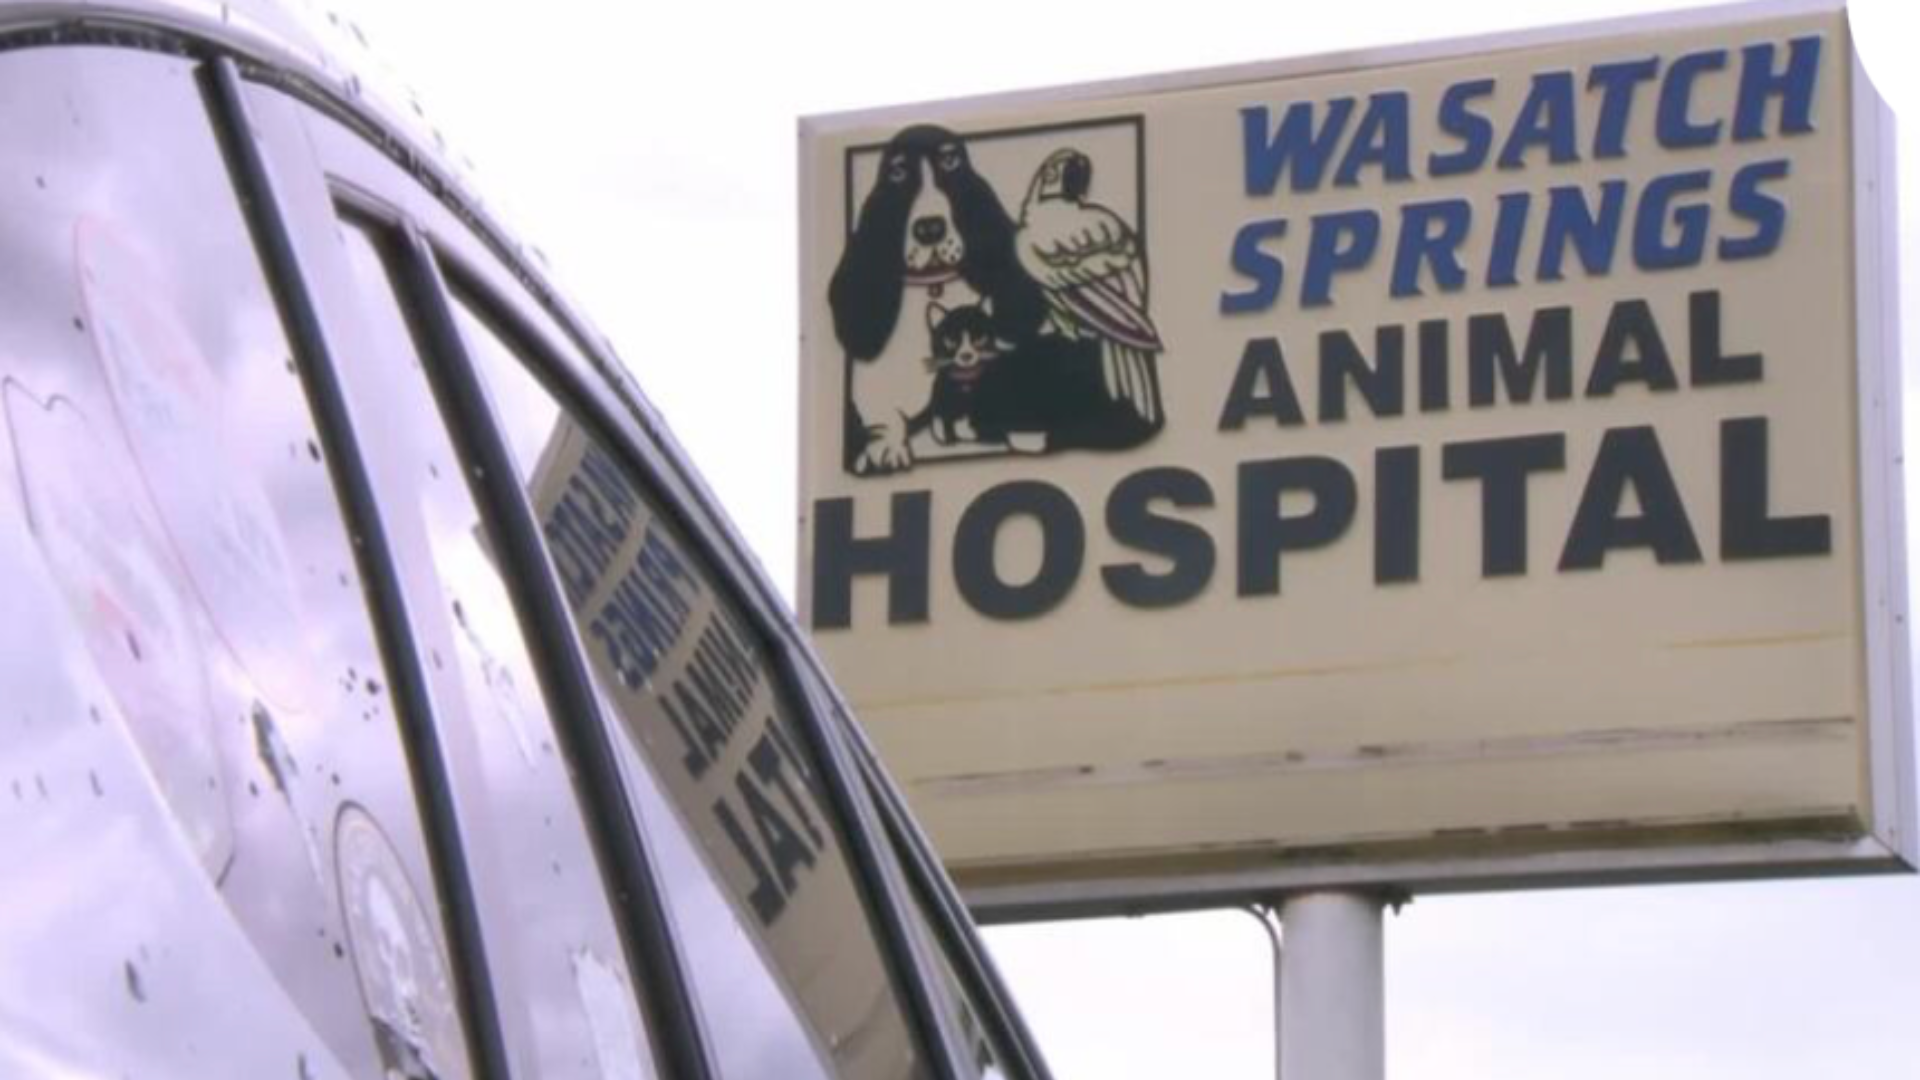 Wasatch Springs Animal Hospital sign.